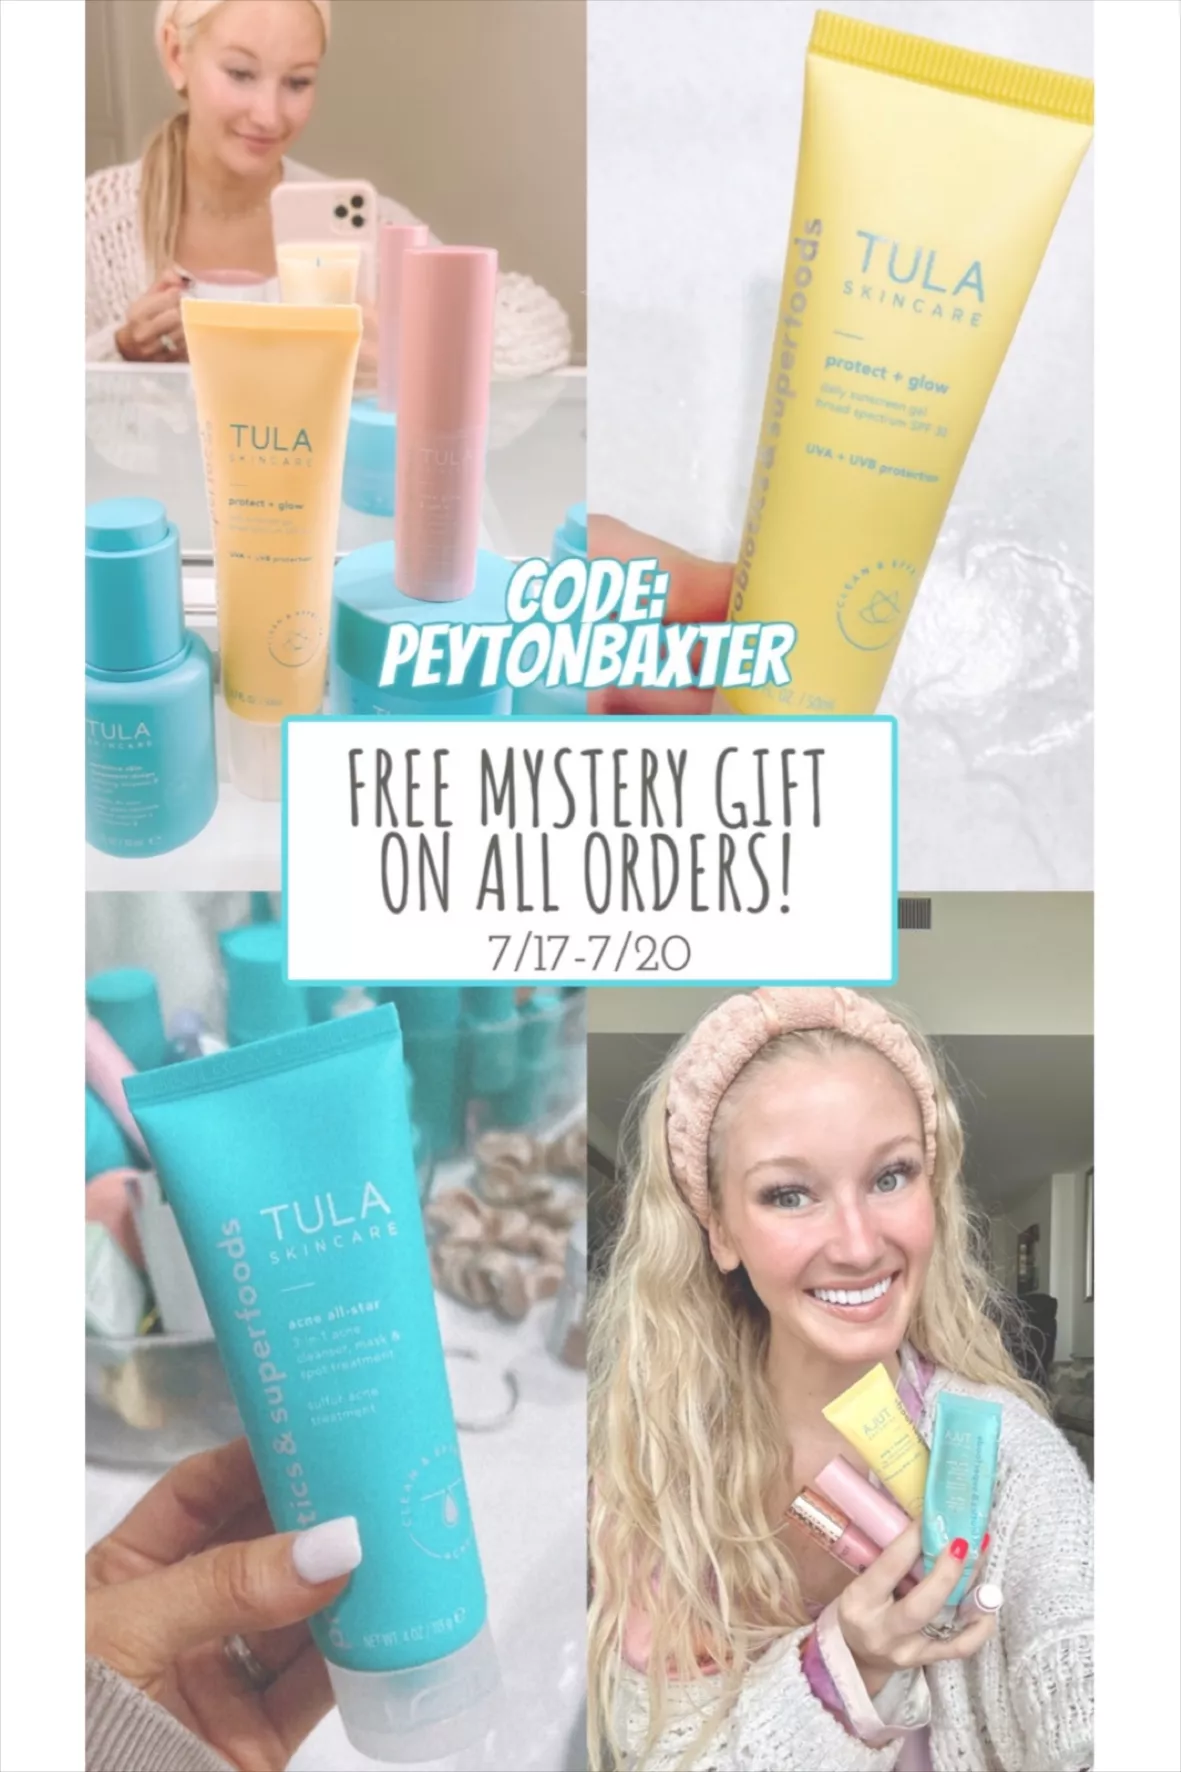 Tula Skincare Products Are All 20% Off Right Now